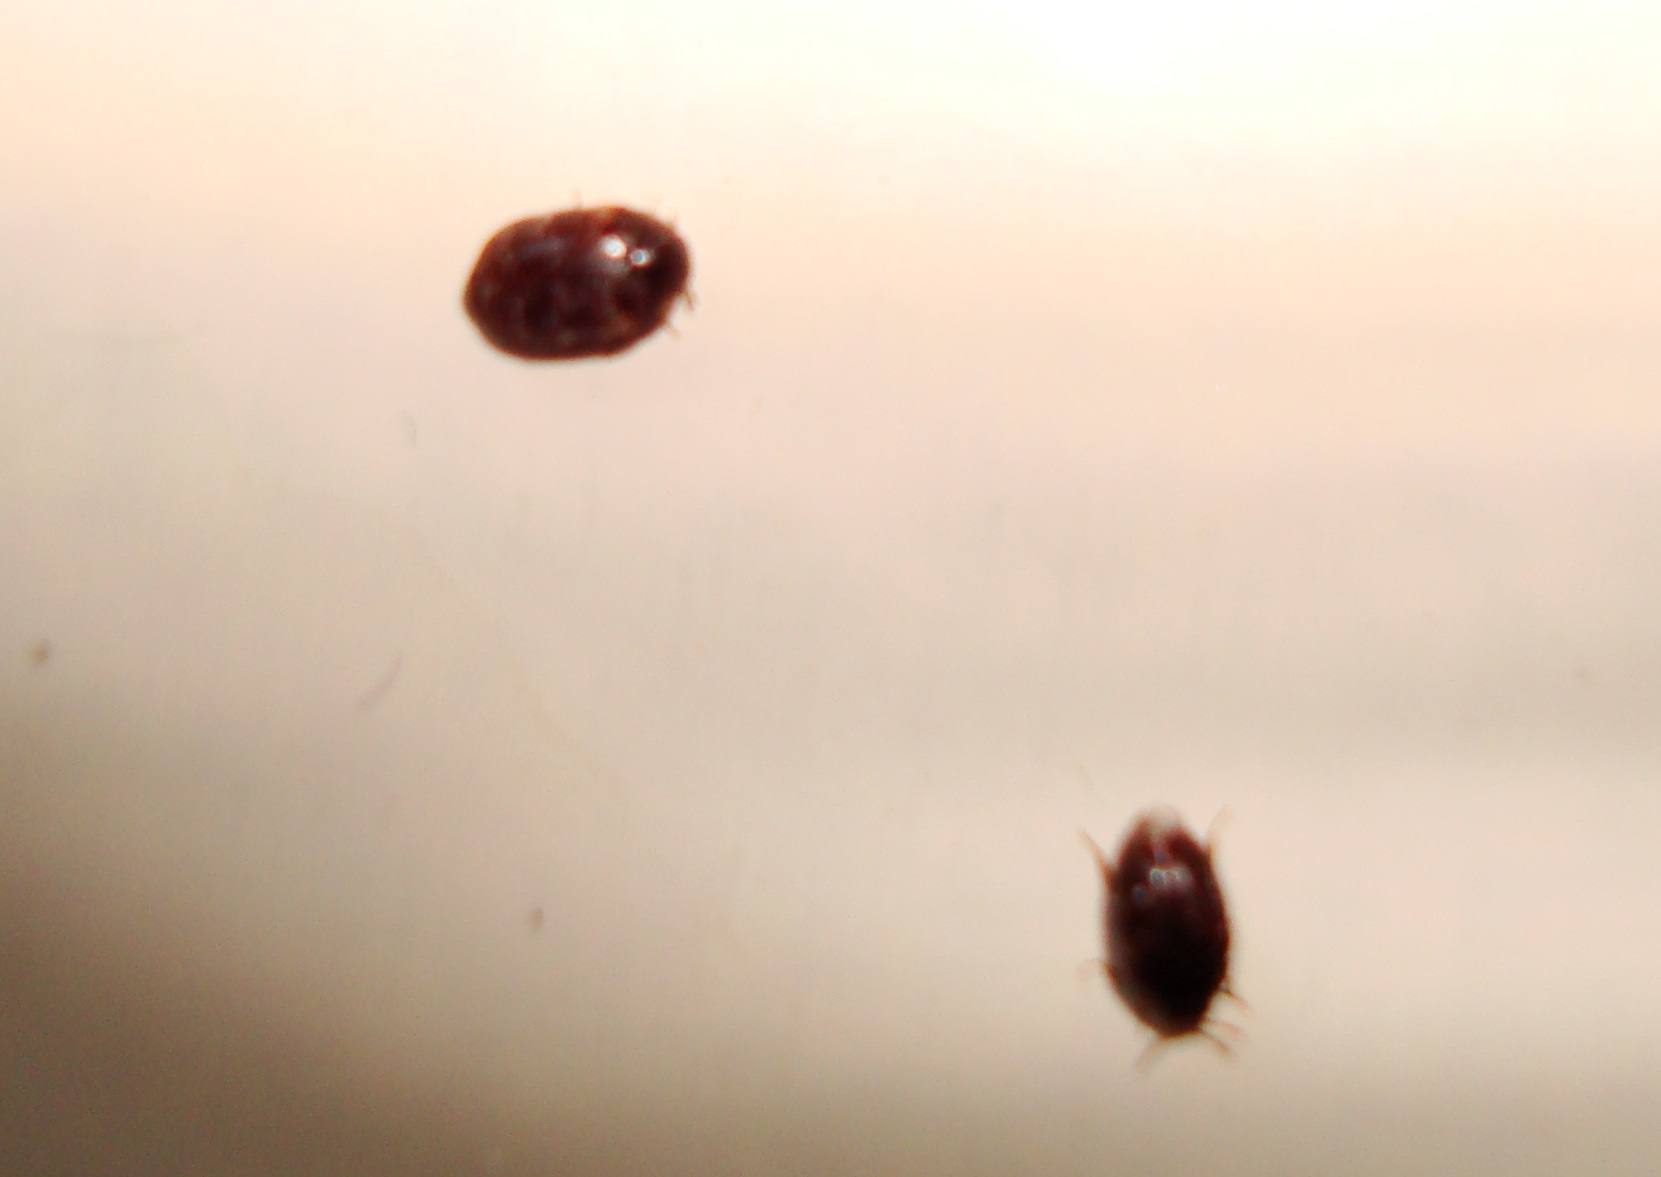 bread beetles in my pantry! | PEST CONTROL CHEMICALS 800-877-7290